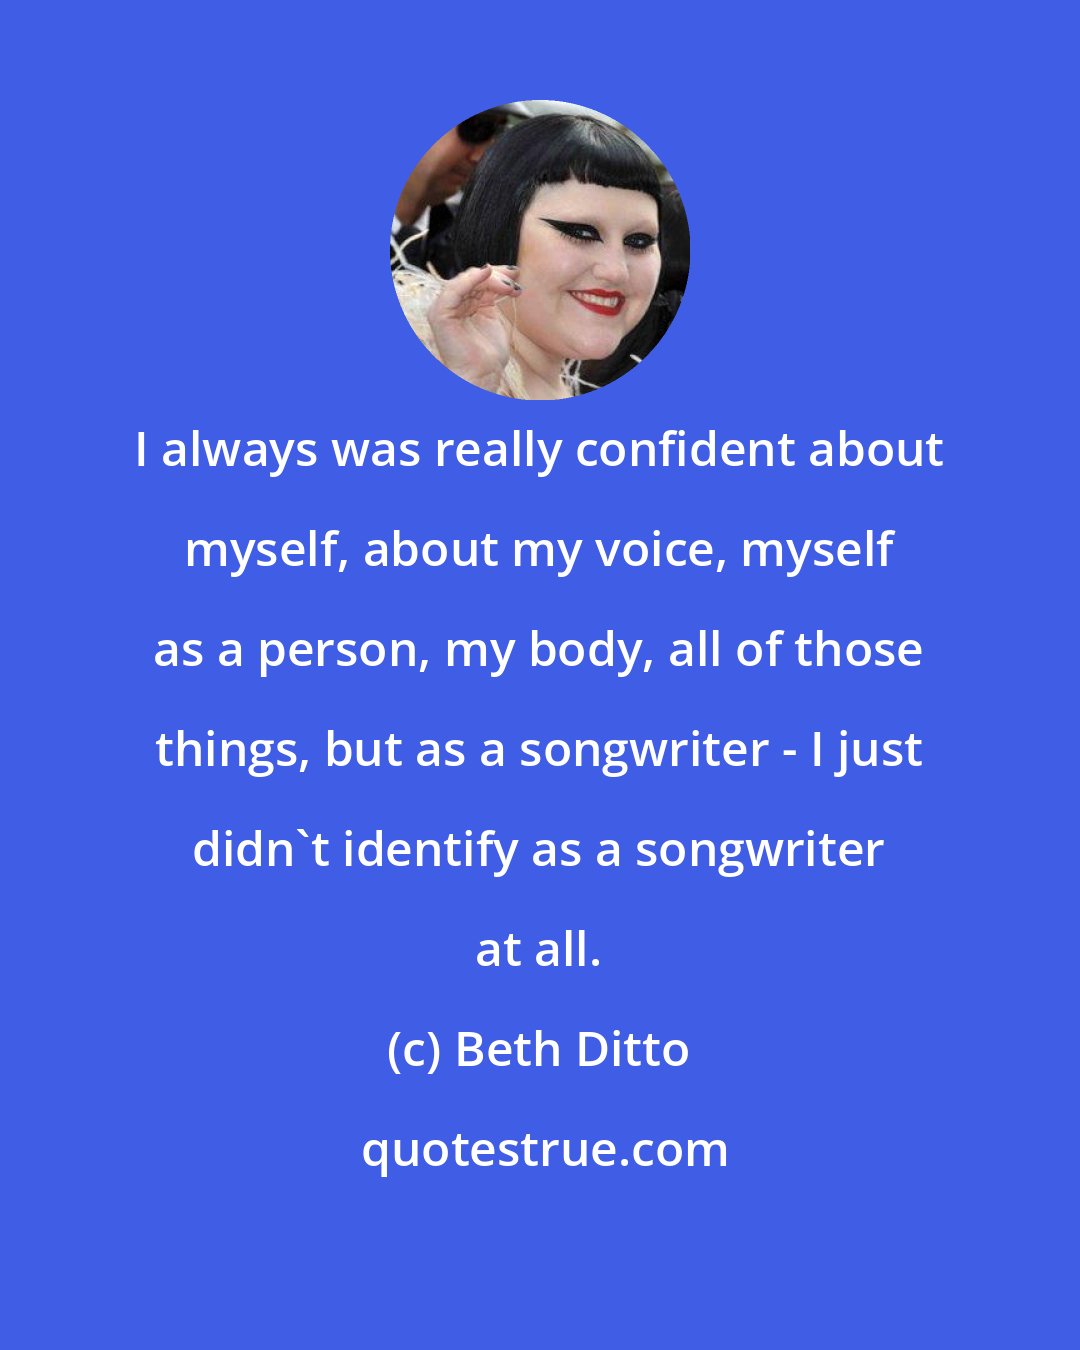 Beth Ditto: I always was really confident about myself, about my voice, myself as a person, my body, all of those things, but as a songwriter - I just didn't identify as a songwriter at all.